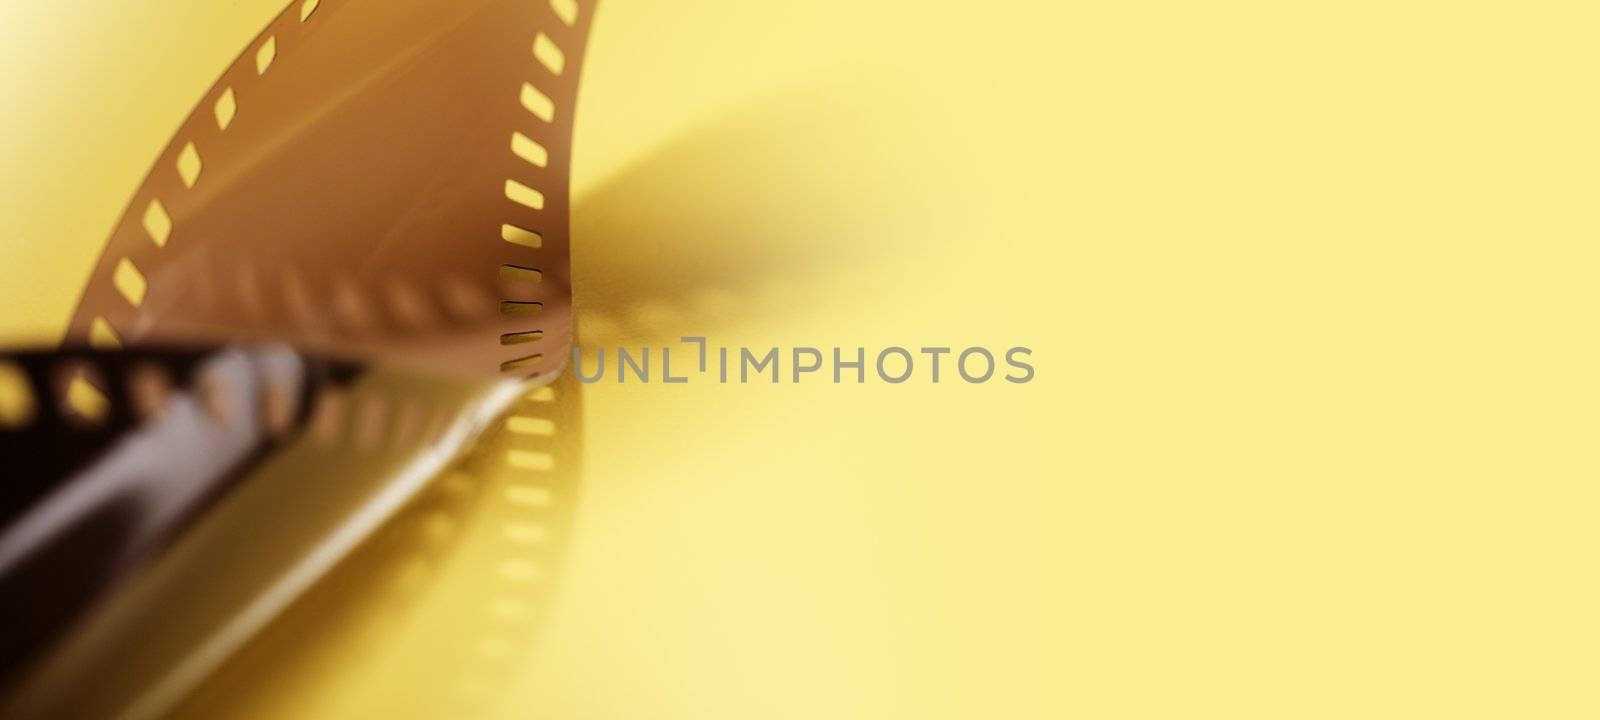 Film background image with copy space.